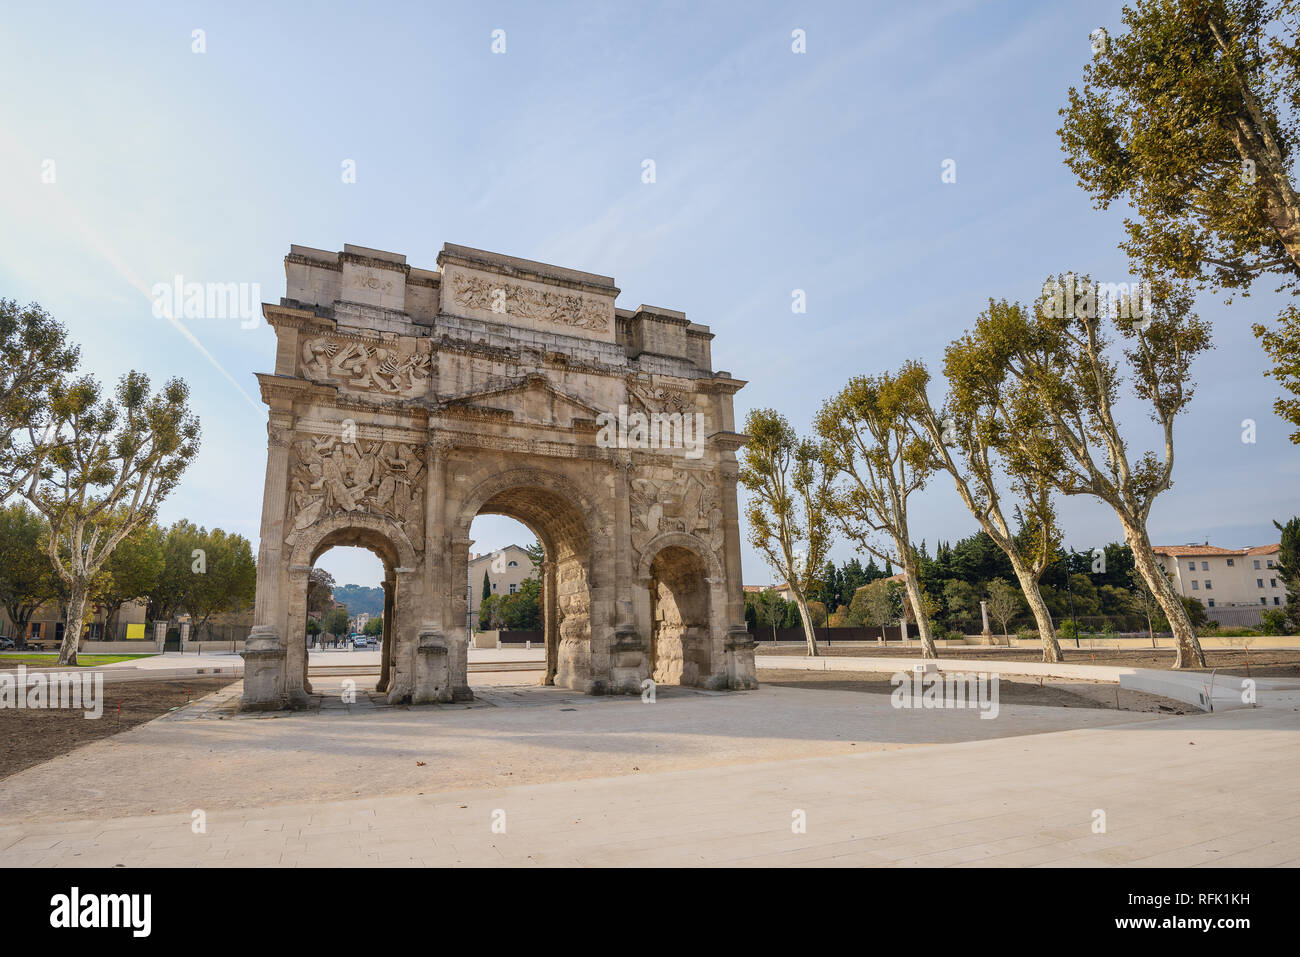 Ruins of ancient Roman Triumphal Arch at Orange. France Stock Photo